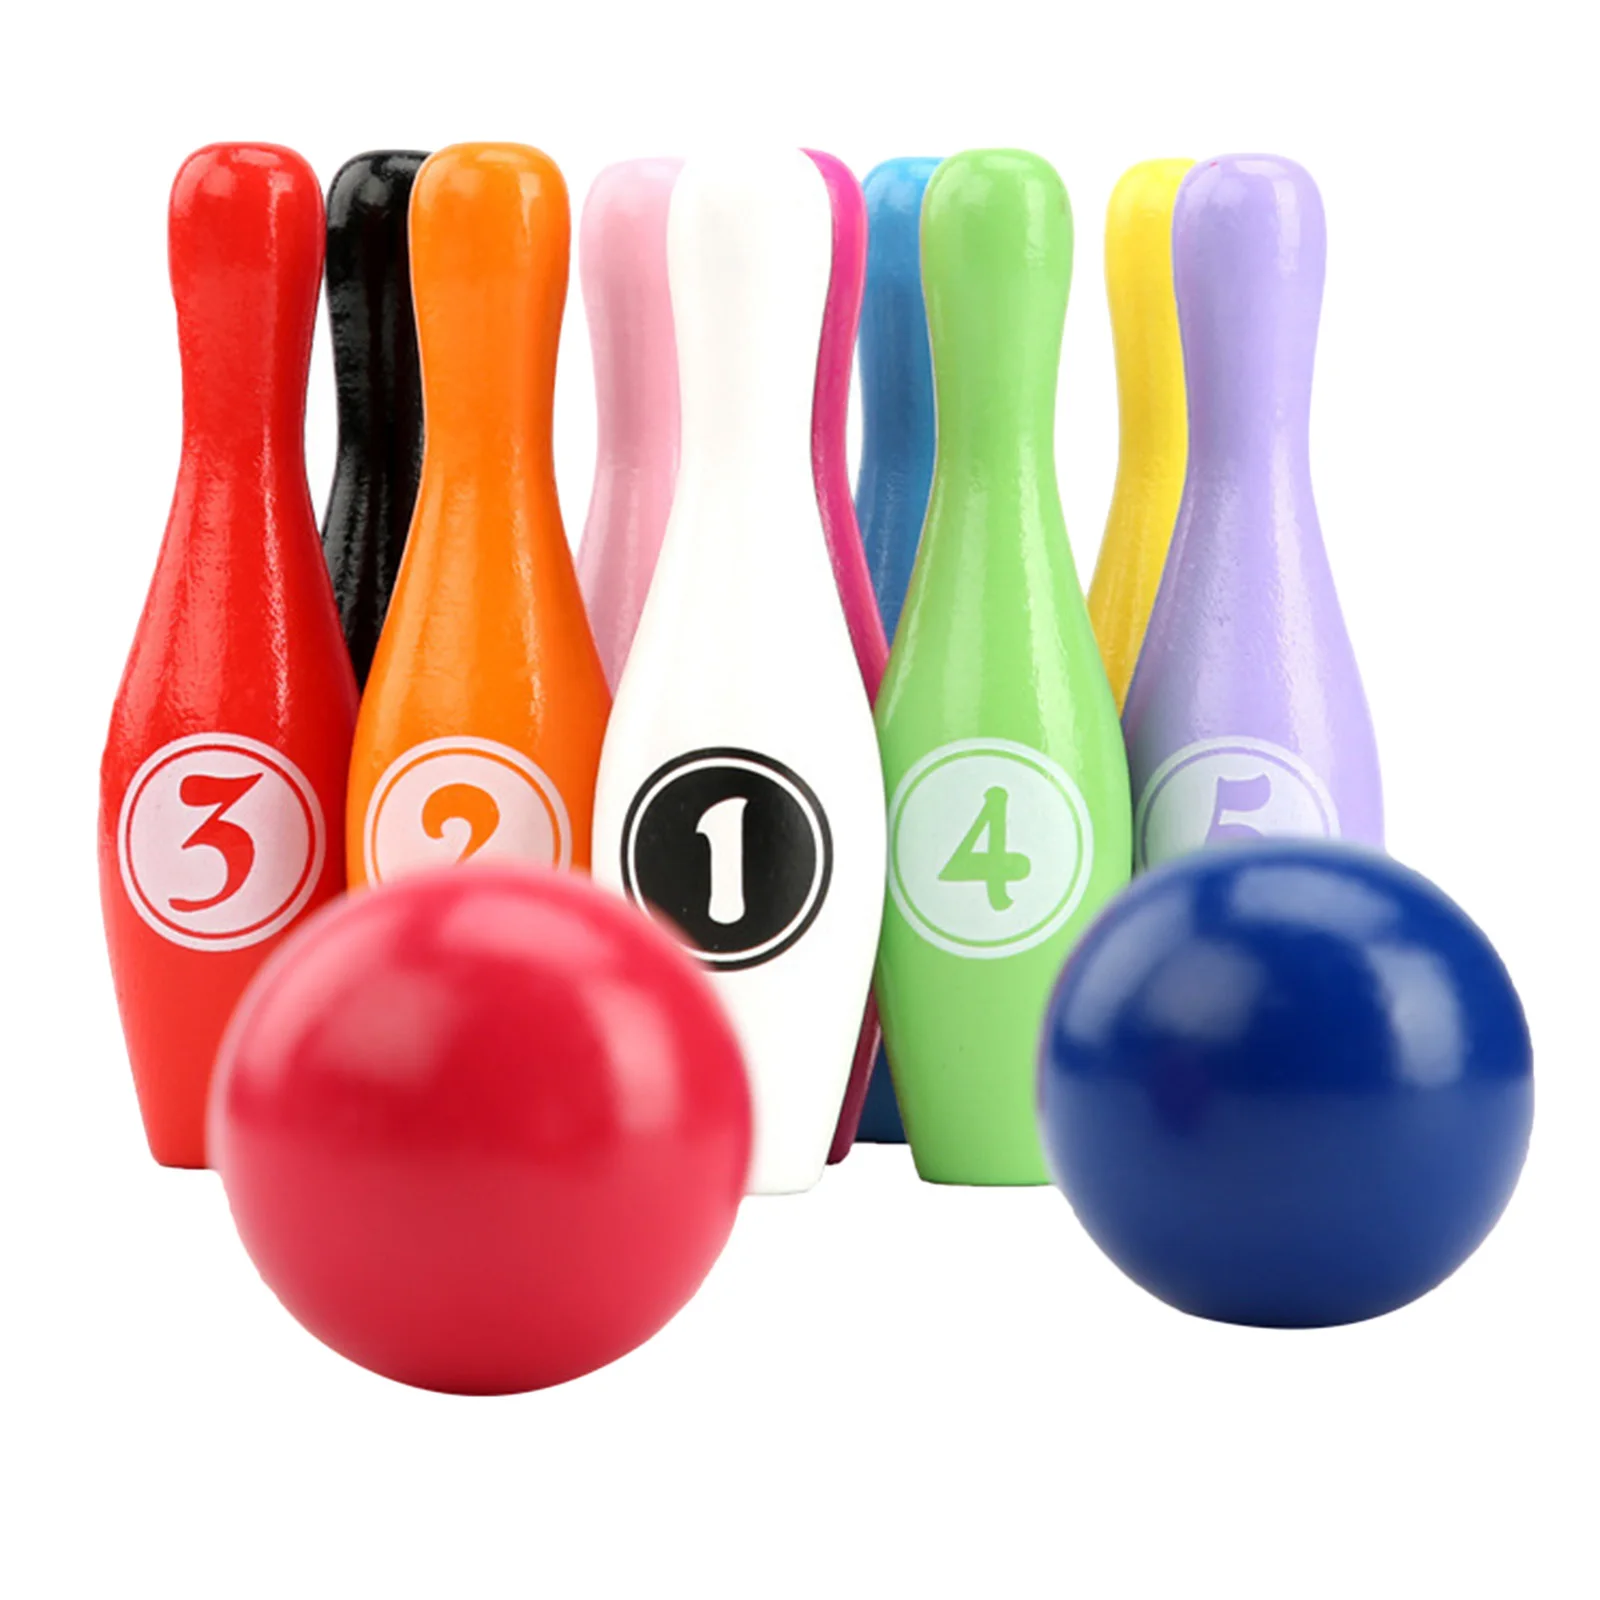 Kids Bowling Set Includes 10 Classic Colorful Pins And 2 Balls Early Education Indoor And Outdoor Games for Age Children